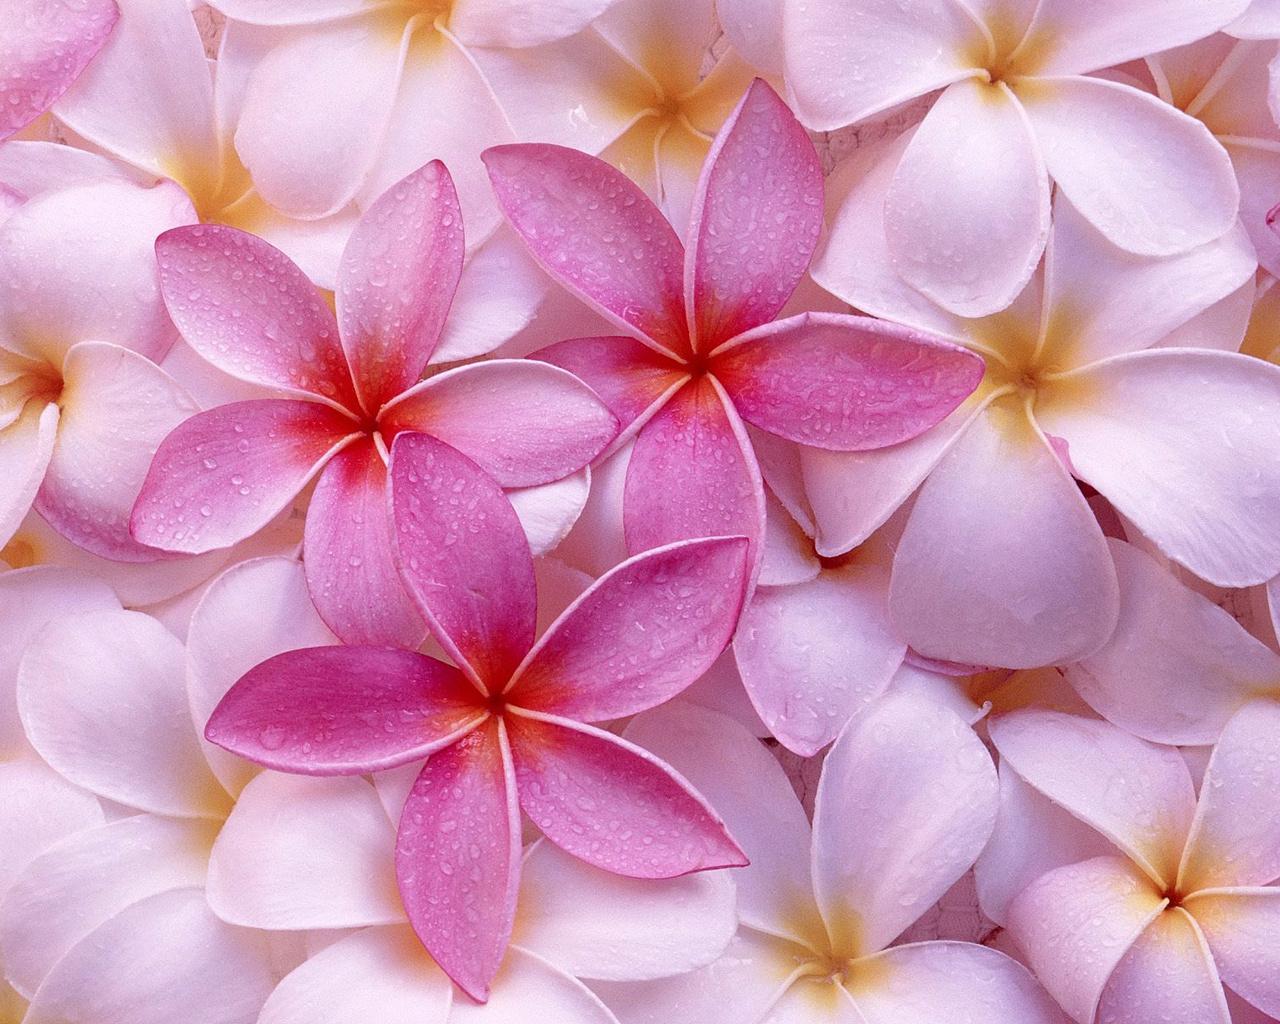 Colourful Flowers Wallpaper. Colourful Wallpaper. Colourful Flowers